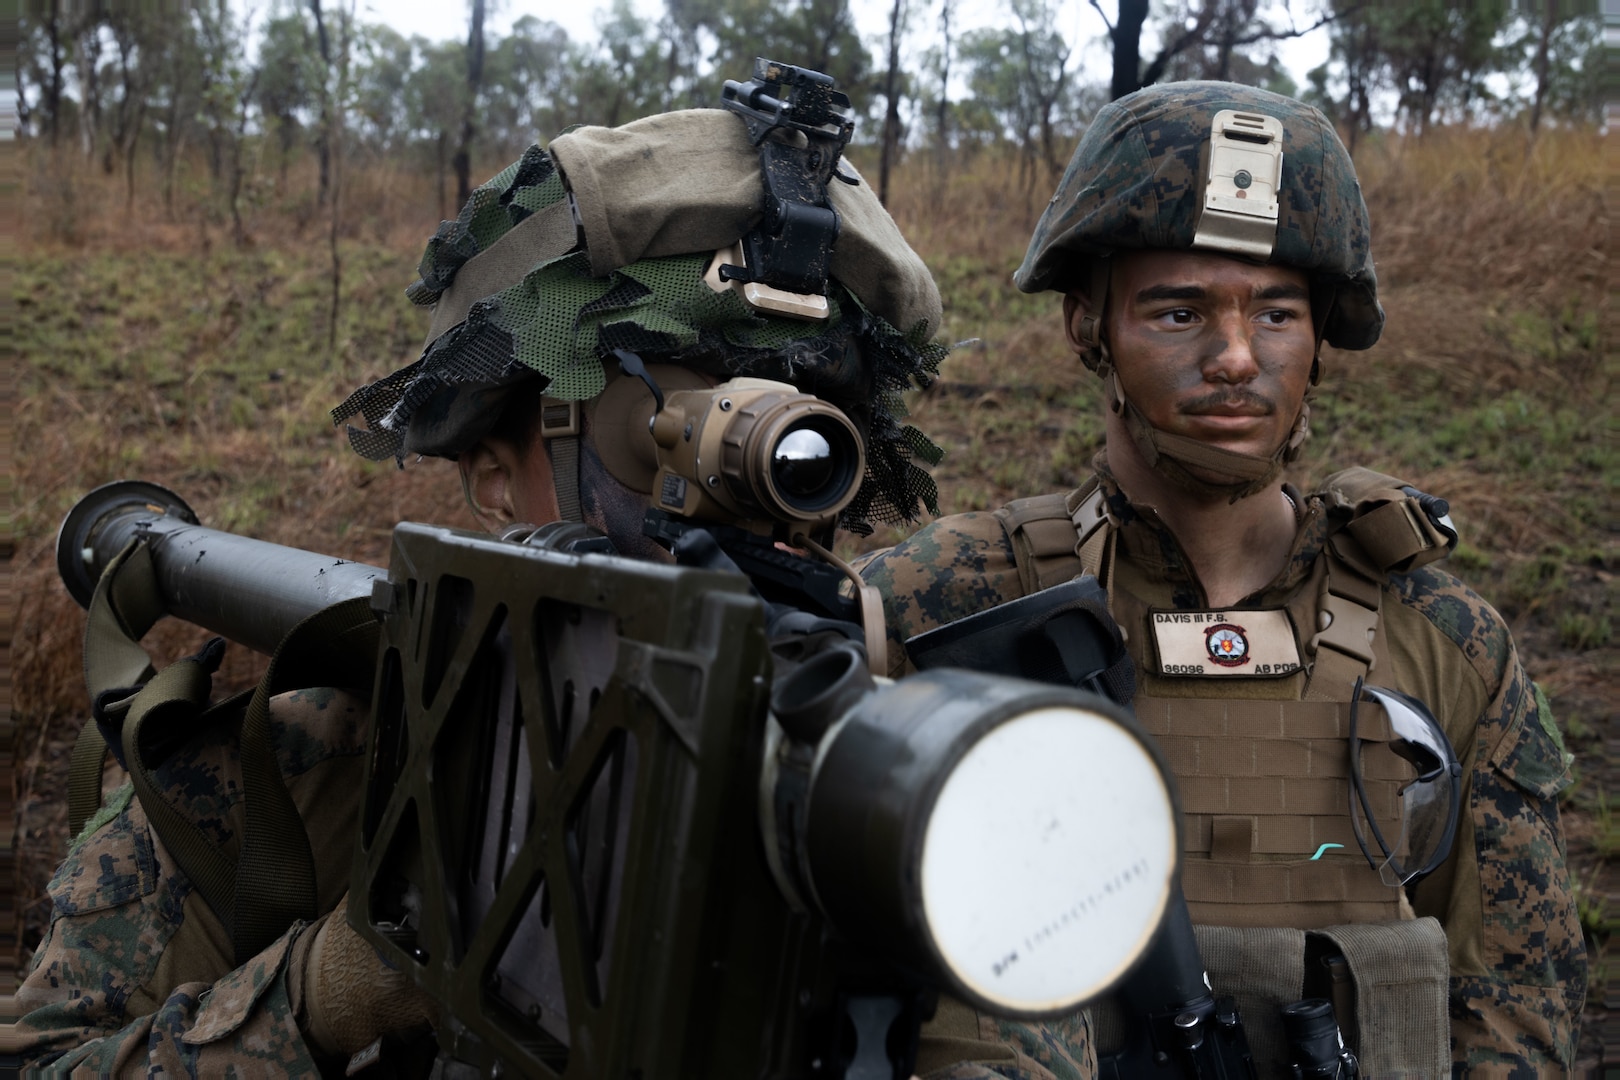 U.S. Marine Corps Cpl. Simon Li and Lance Cpl. Frank Davis III, both low altitude air defense gunners with Marine Medium Tiltrotor Squadron 265 (Rein.), 31st Marine Expeditionary Unit, prepare a FIM-92E stinger missile system during a forward arming and refueling point exercise at Shoalwater Bay Training Area, Australia, July 4, 2023. Marines with 2d LAAD provided a defensive posture for the FARP from aerial threats as part of an expeditionary advanced base of operations. The 31st MEU is operating aboard ships of the America Amphibious Ready Group in the 7th Fleet area of operations to enhance interoperability with allies and partners and serve as a ready response force to defend peace and stability in the Indo-Pacific region. (U.S. Marine Corps photo by Cpl. Christopher R. Lape)